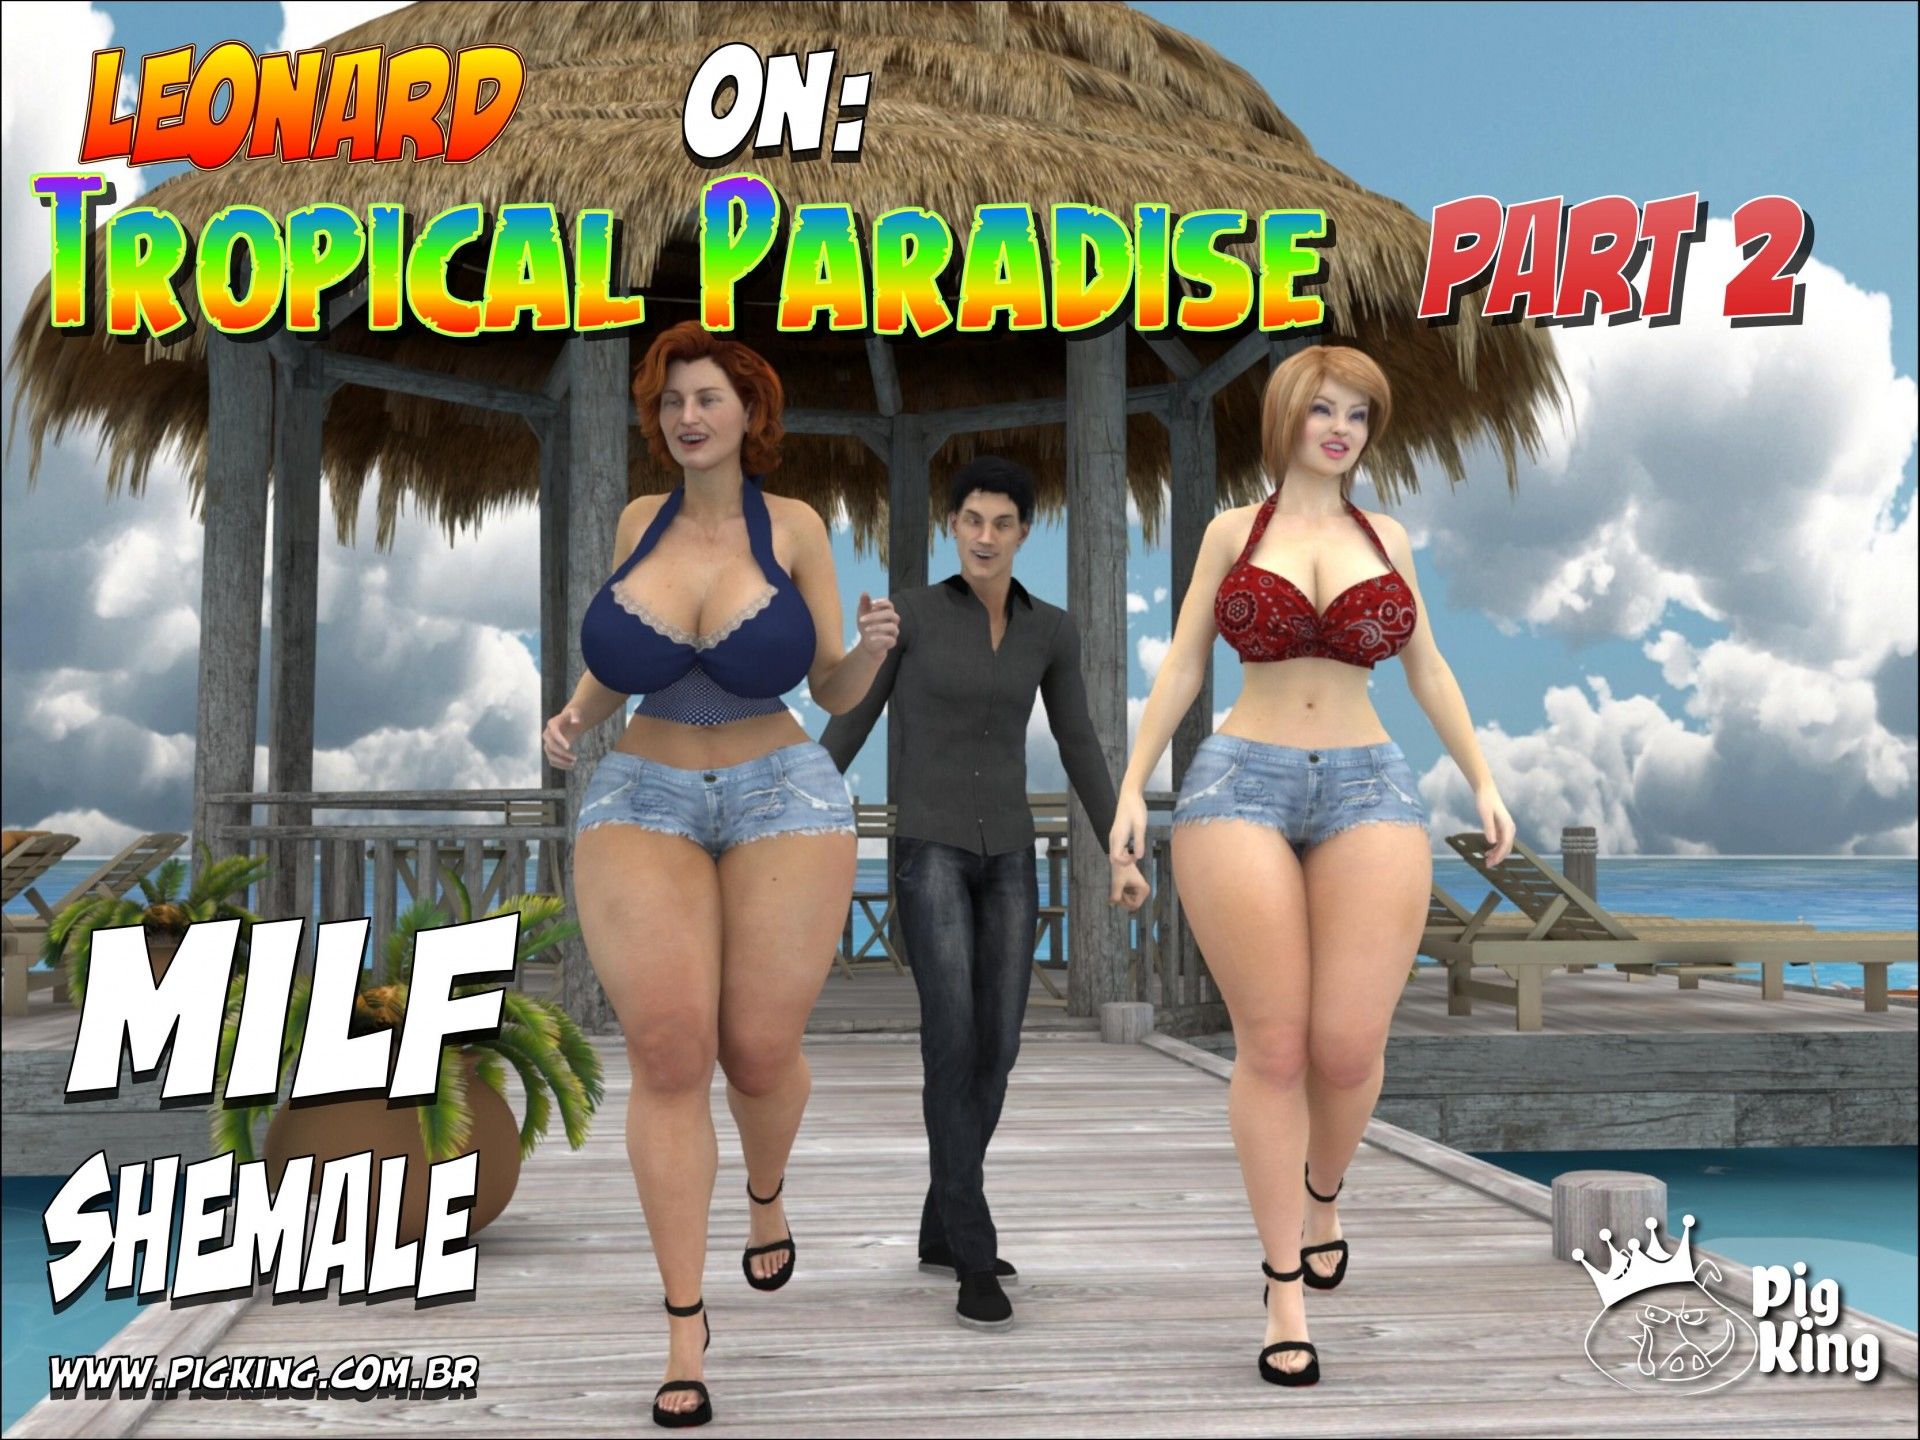 Tropical Paradise Part 2 PigKing Shemale page 1